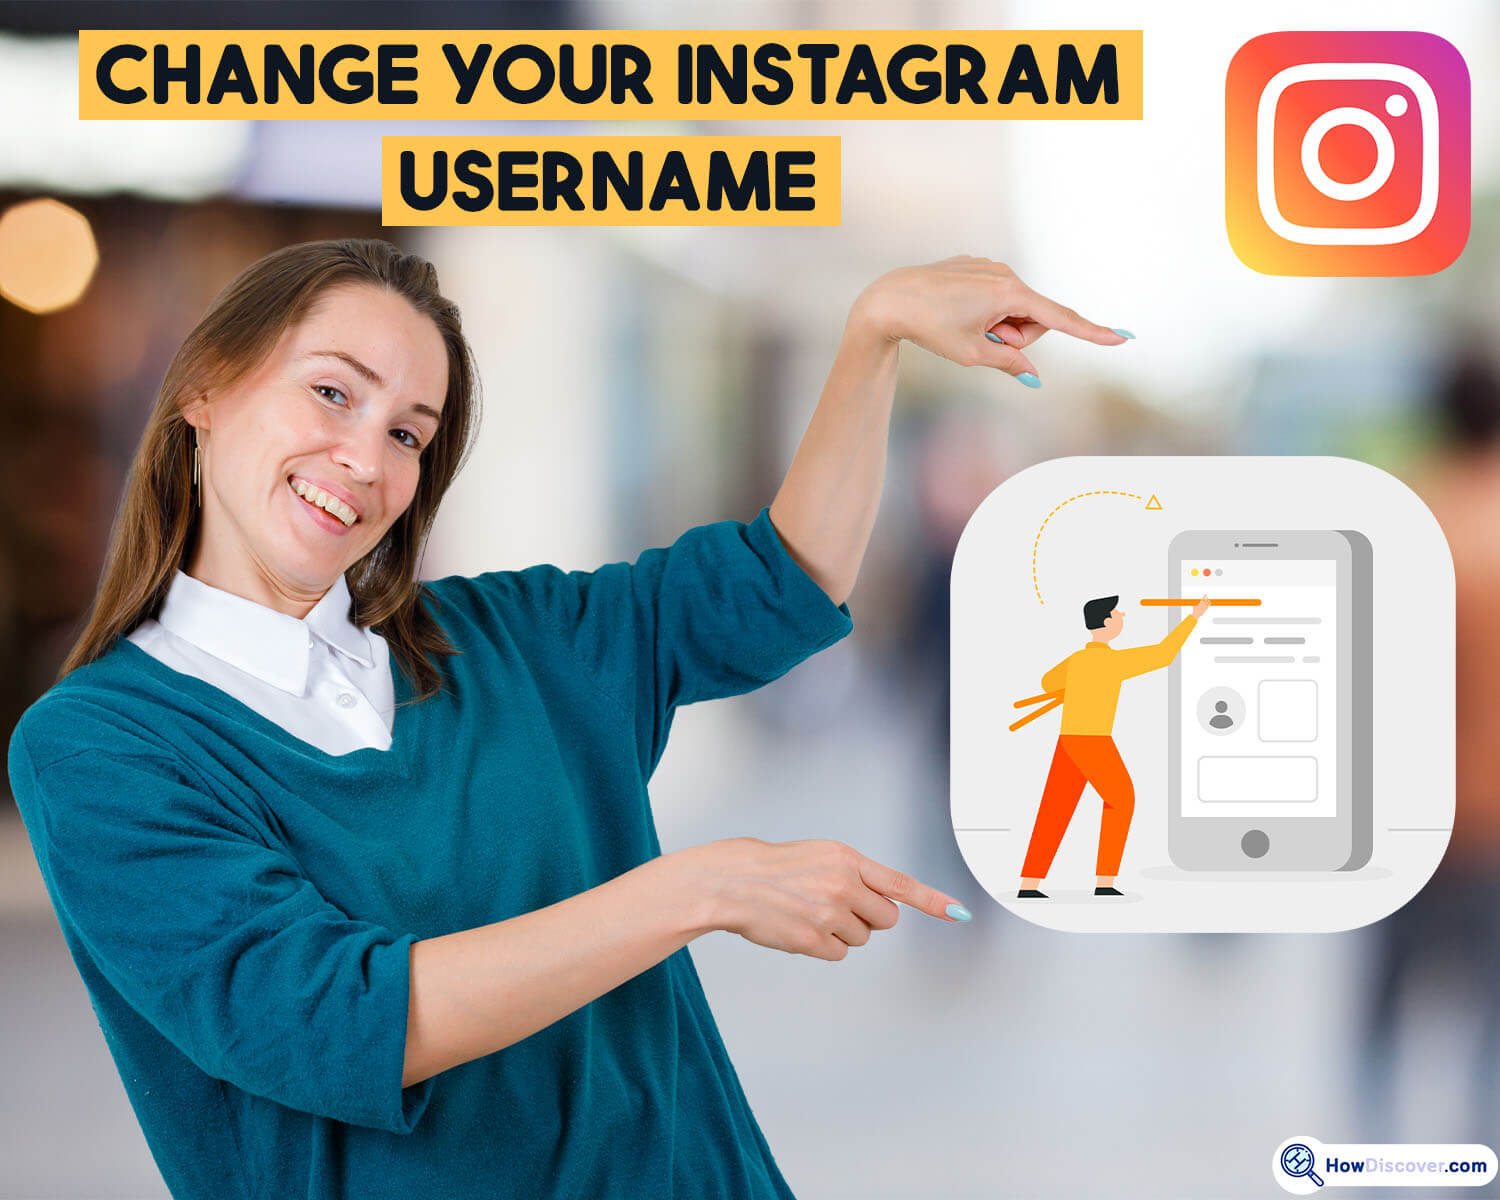 How to change your Instagram username on iPhone or Android